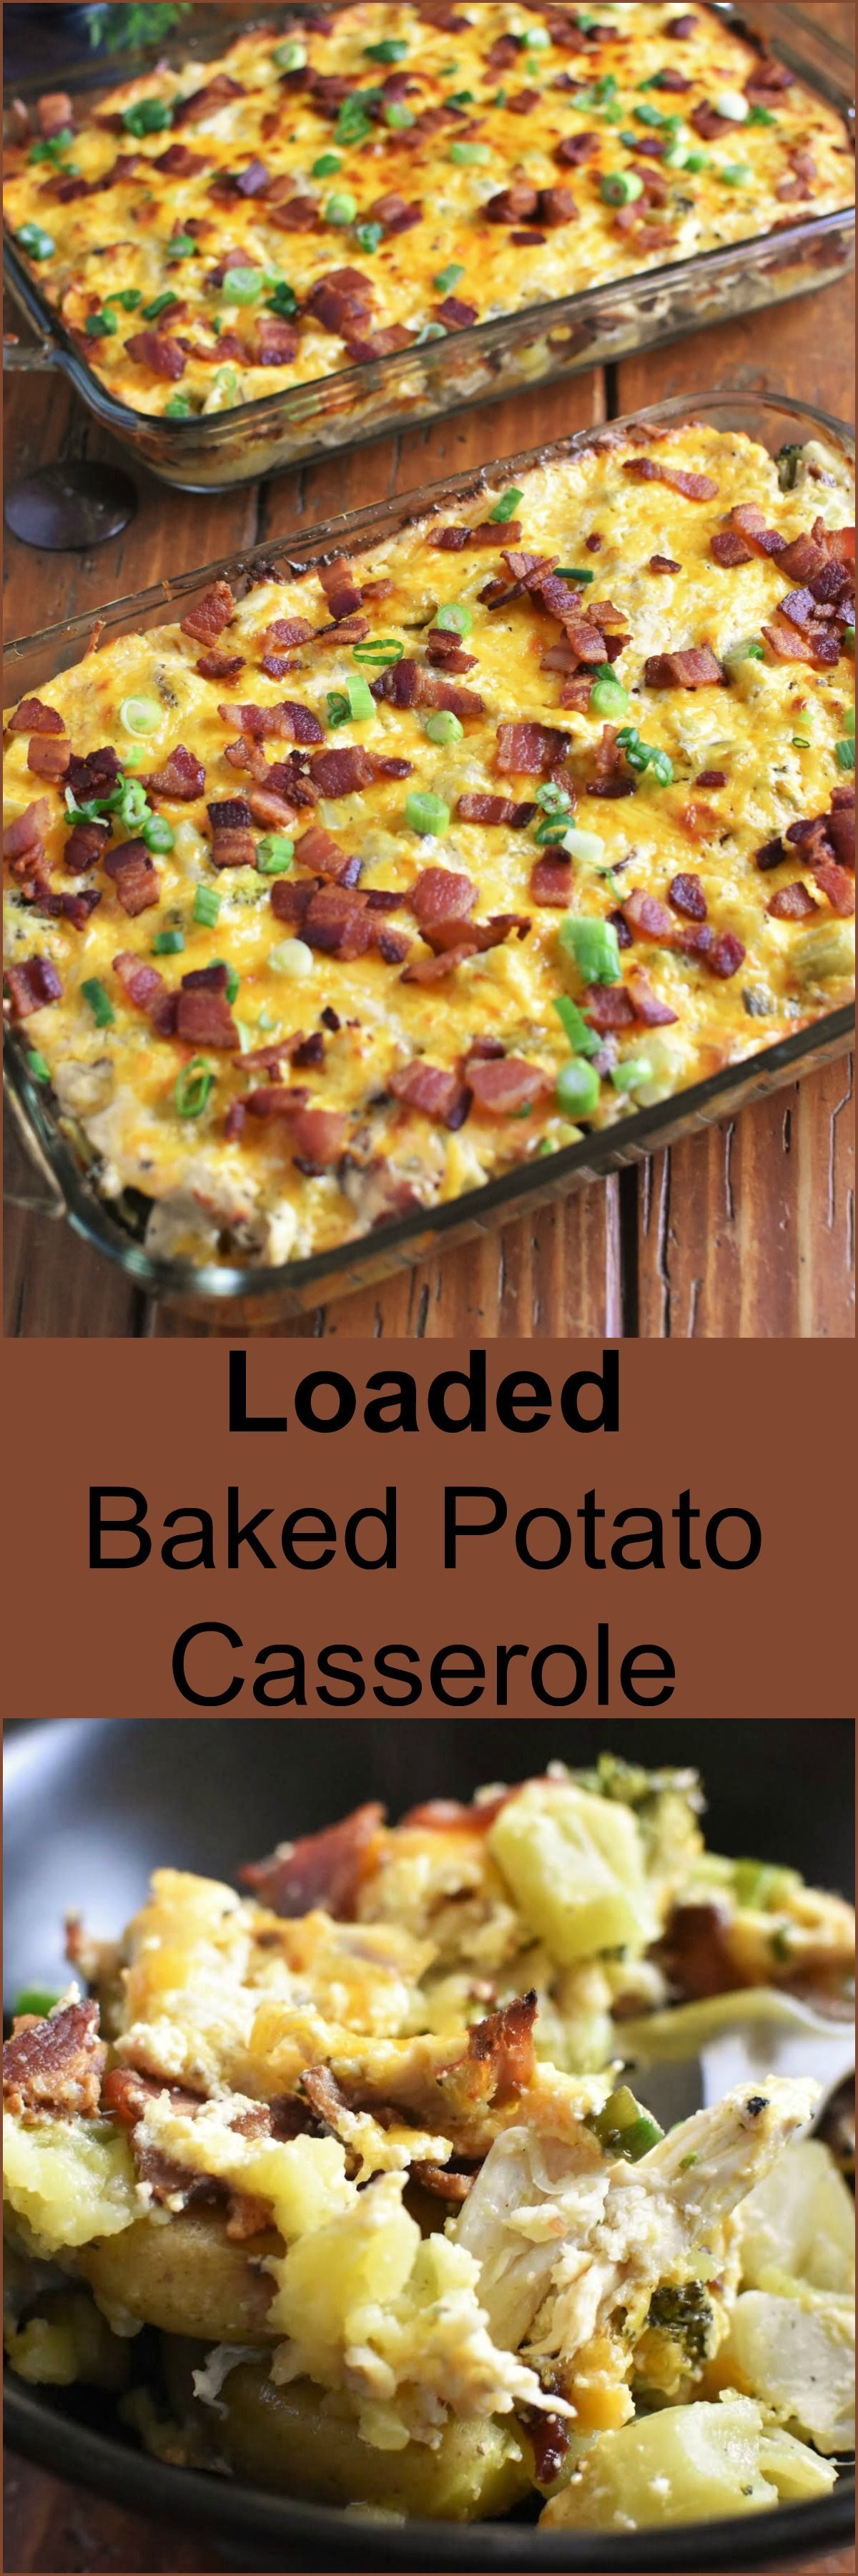 Loaded Baked Potato Casserole full of cheesy, gooey, bacon-y, chicken-y wholesome goodness can be on your table and feed a crowd